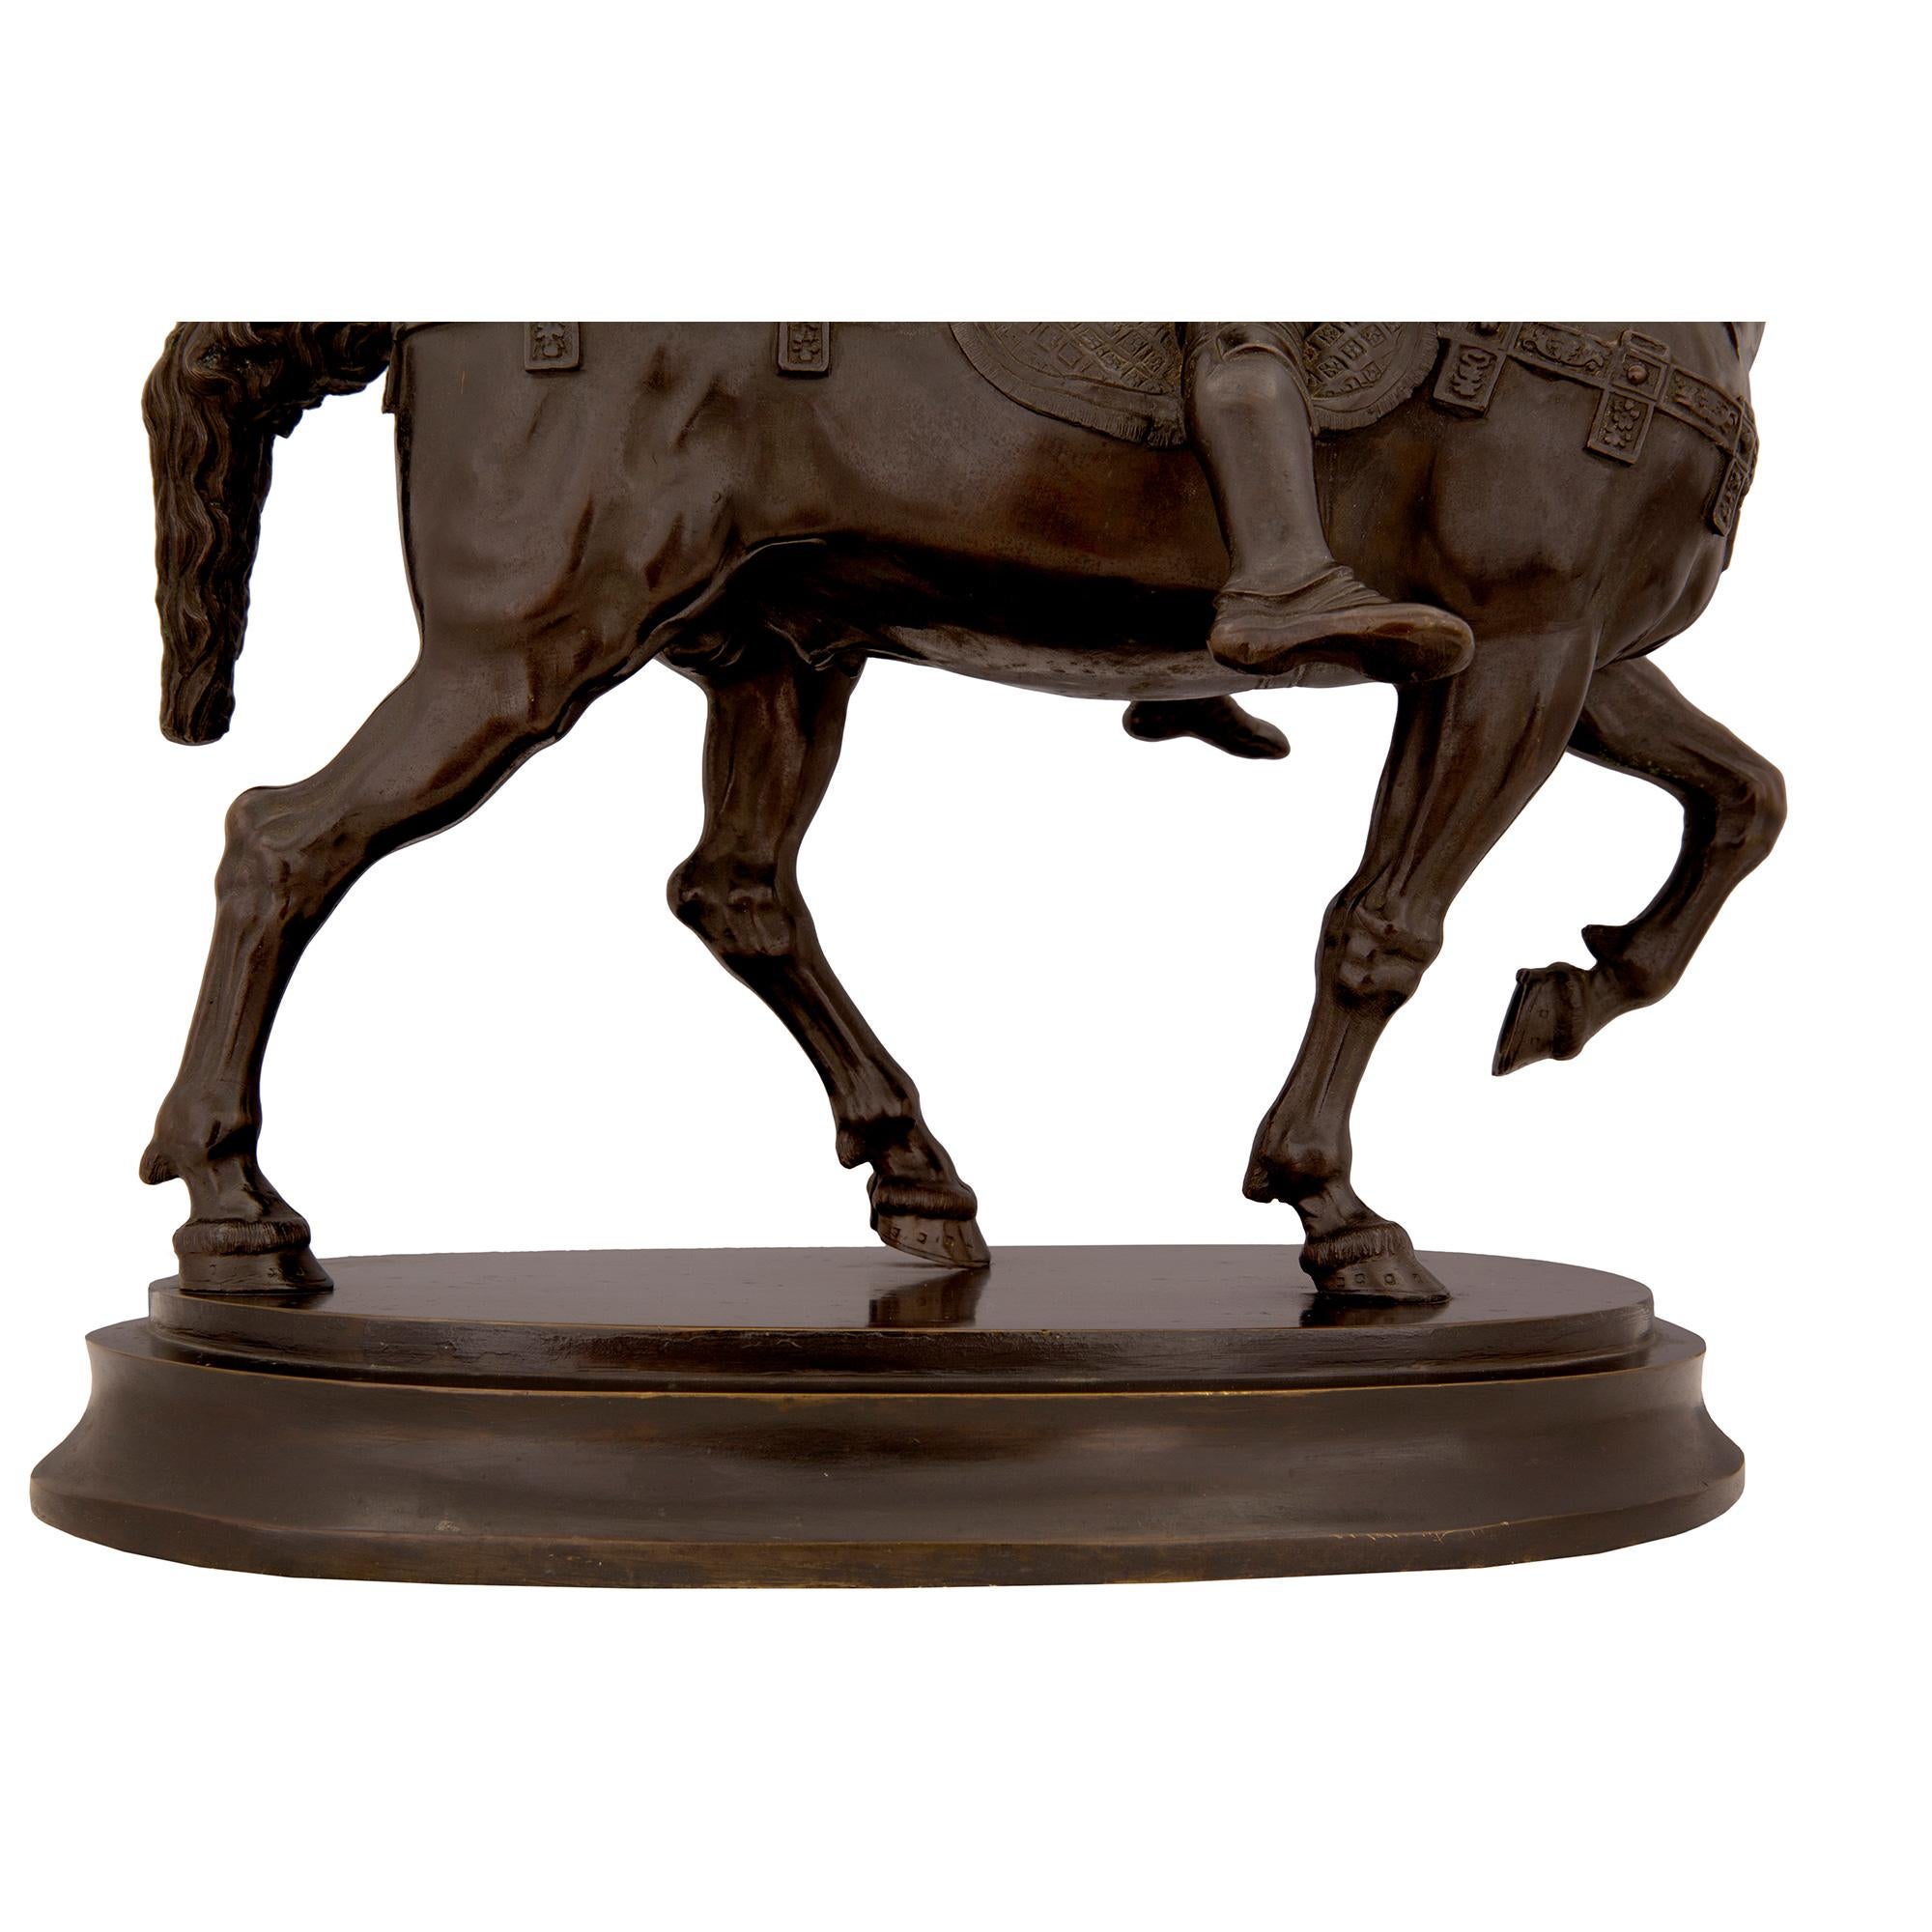 Italian 19th Century Patinated Bronze Statue of a Nobleman on His Horse For Sale 6